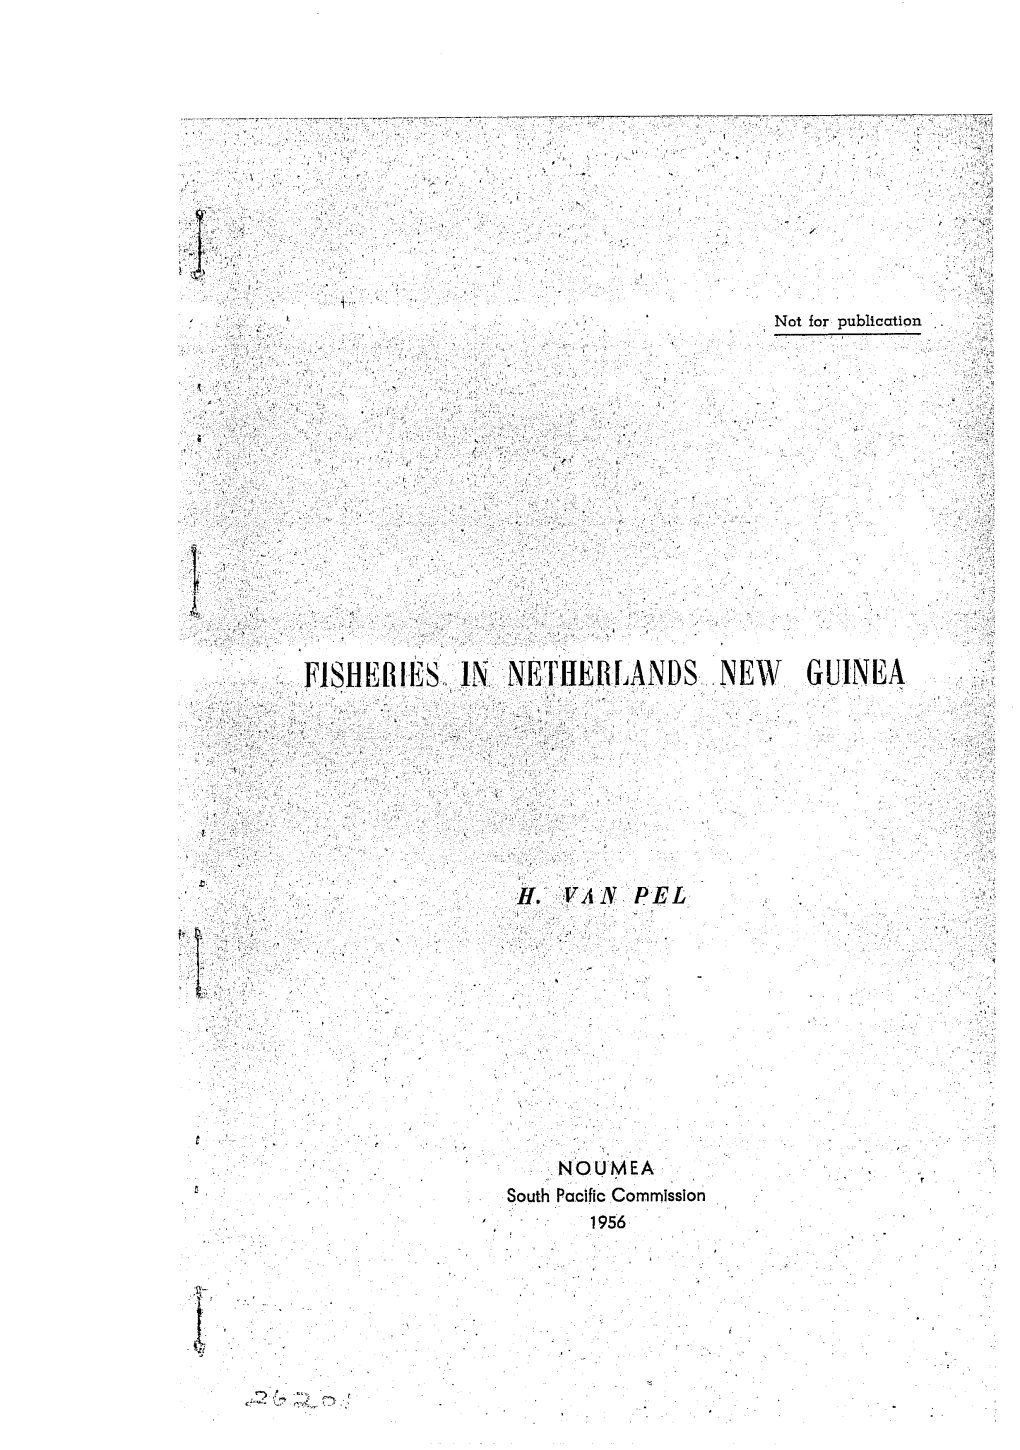 Fisheries in Netherlands New Guinea